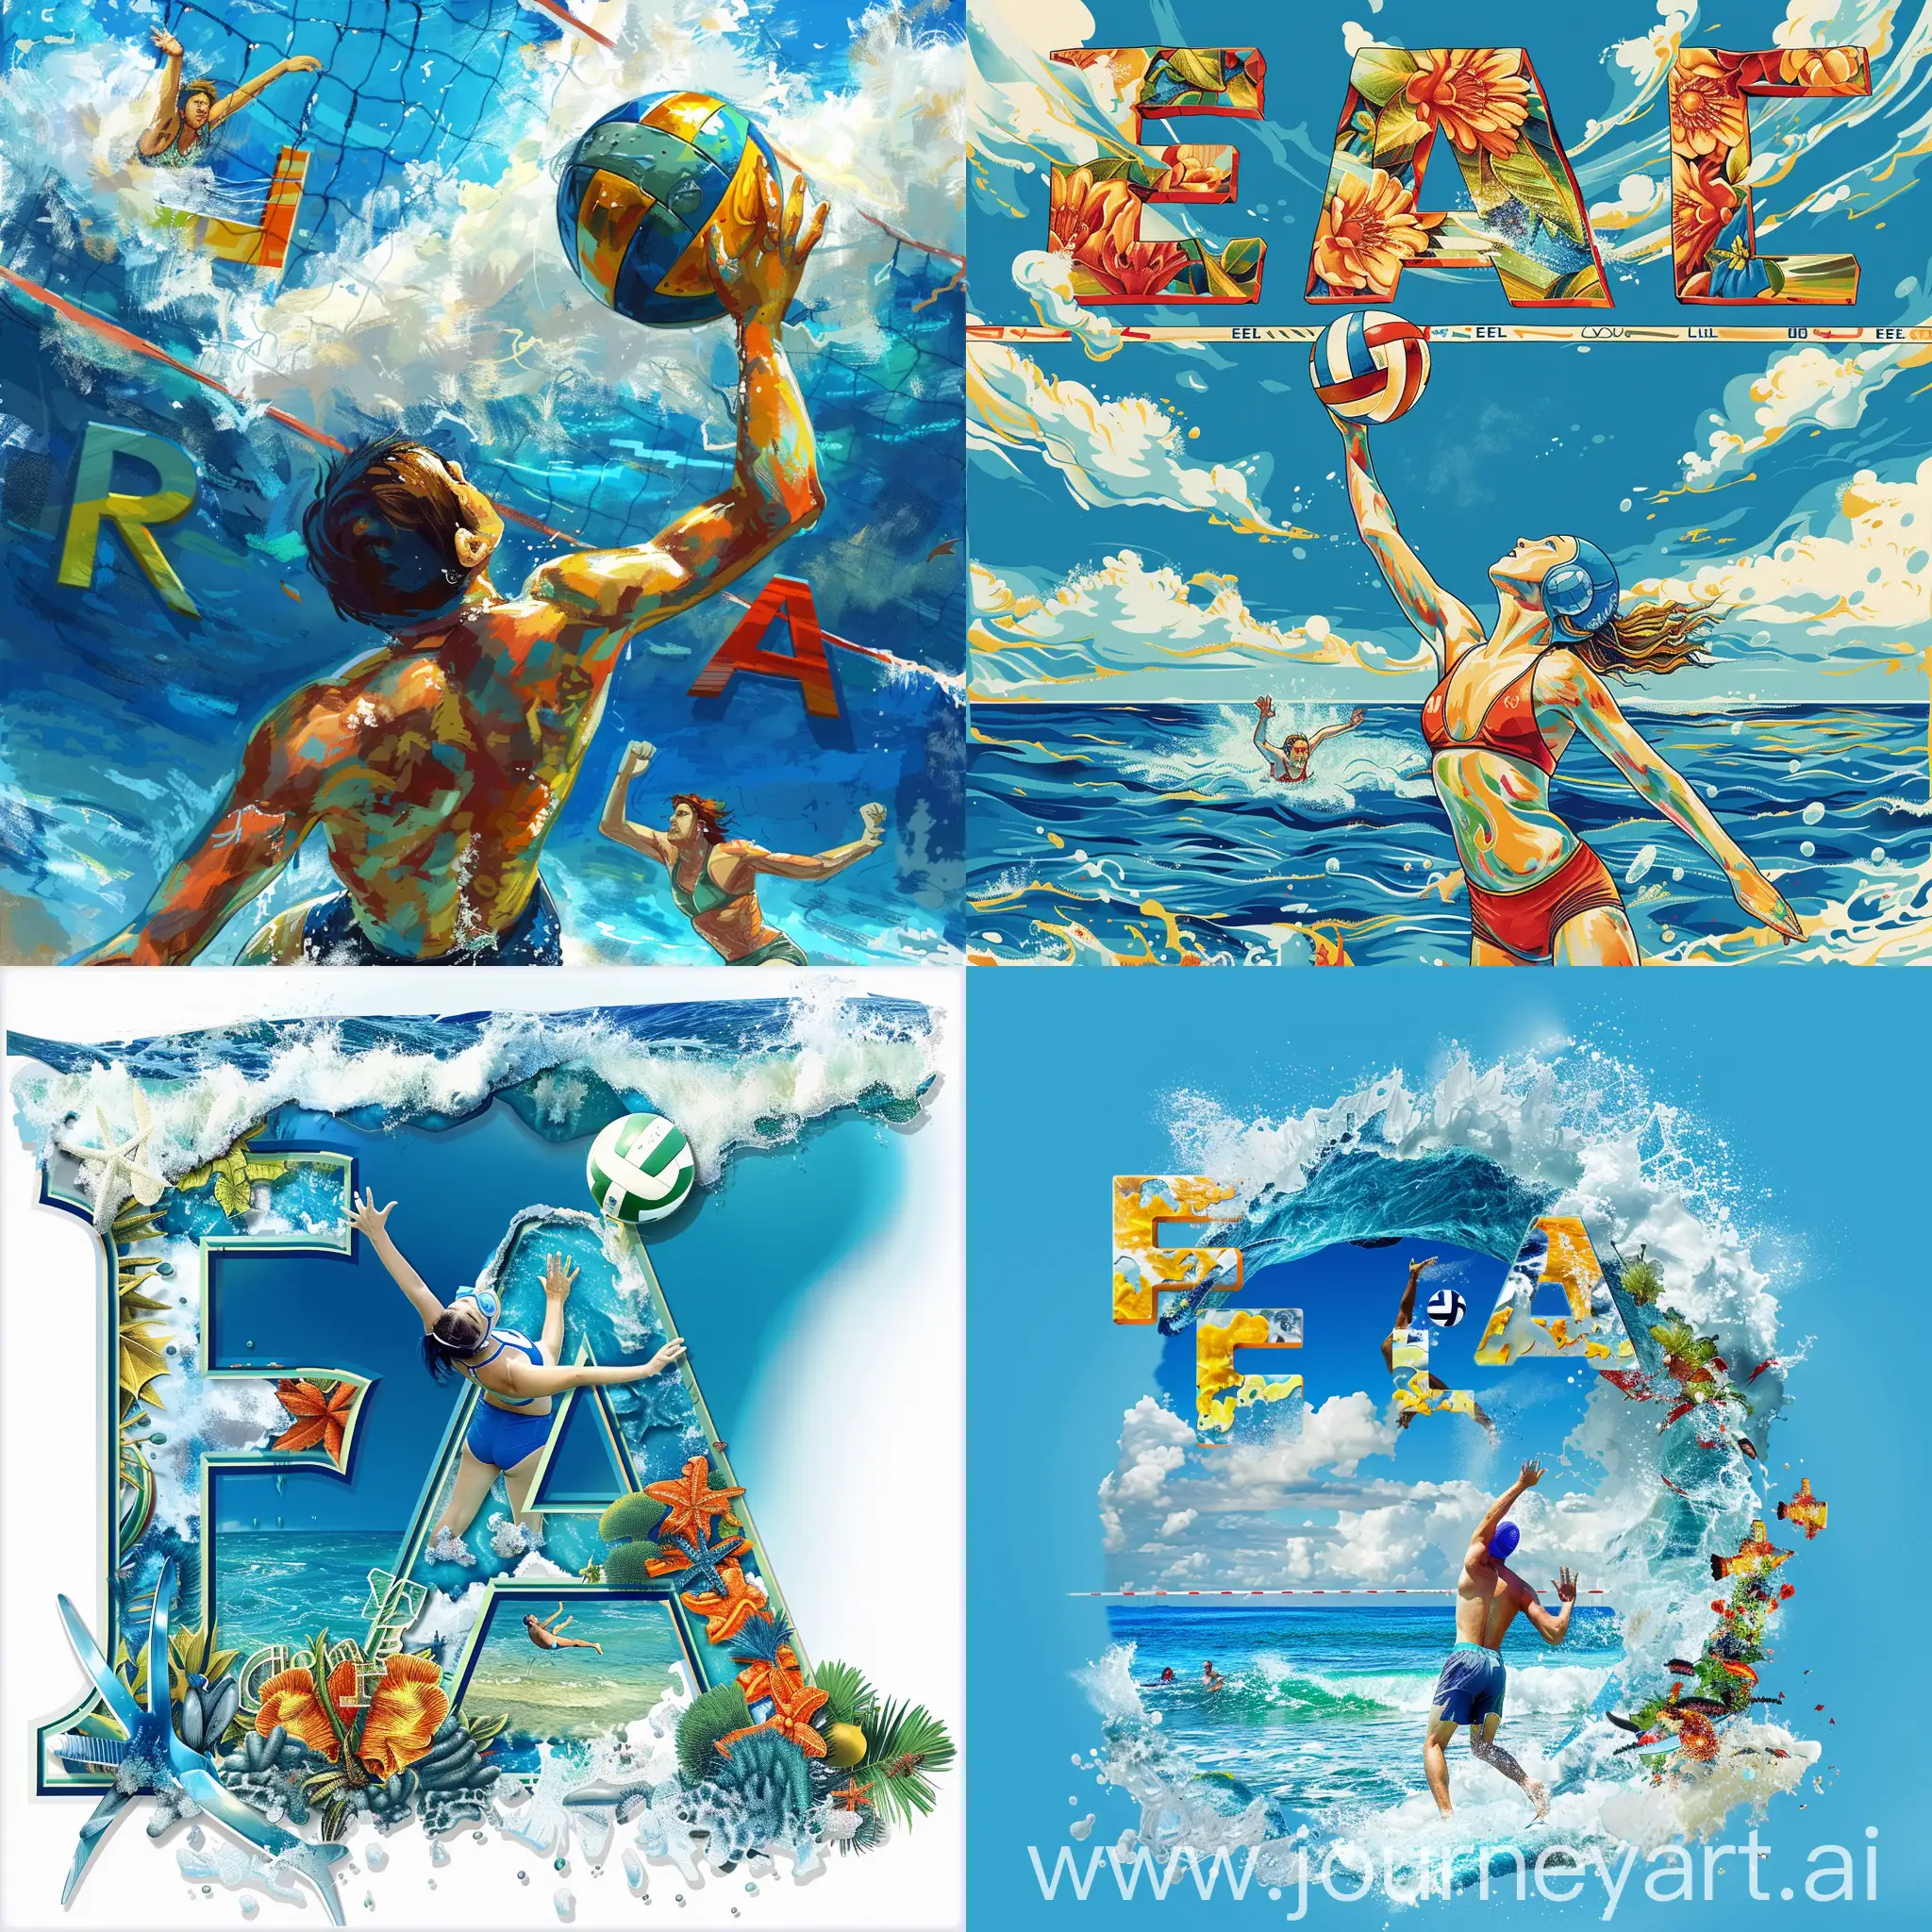 Ocean-Swimmer-and-Volleyball-Player-Enjoying-Leisure-Activities-on-Sunny-Beach